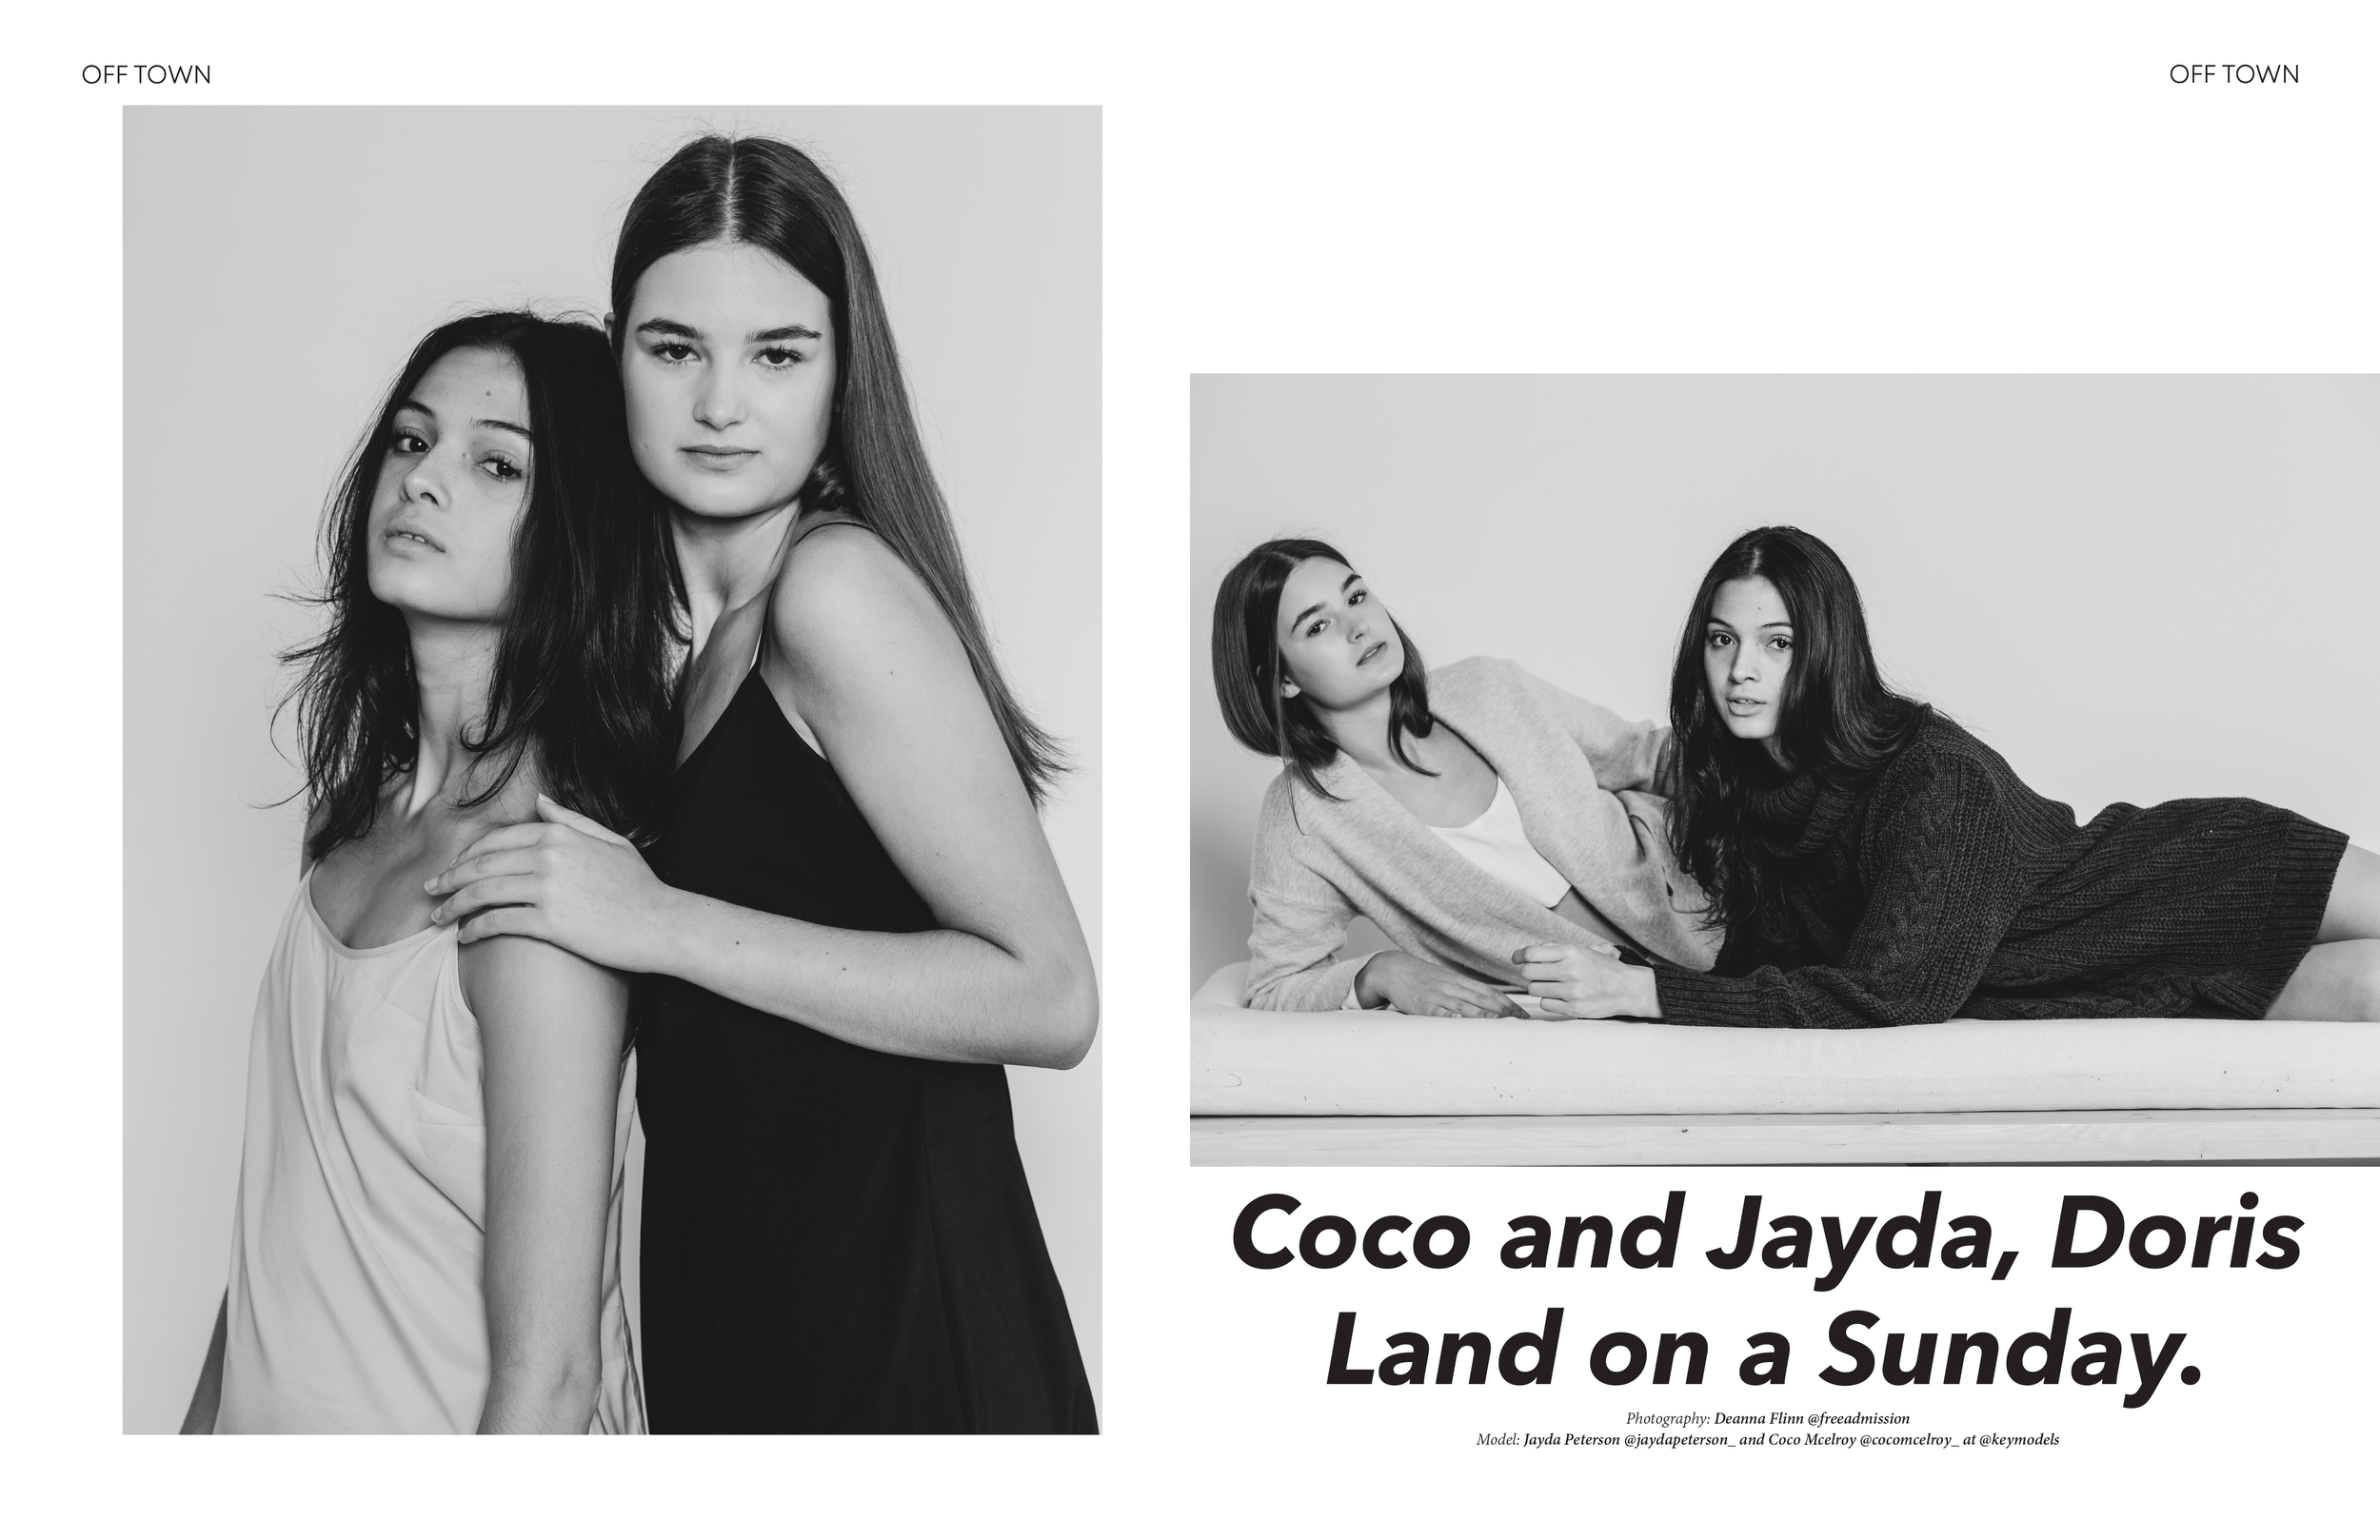 10 coco and jayda, doris land on a sunday-1.png